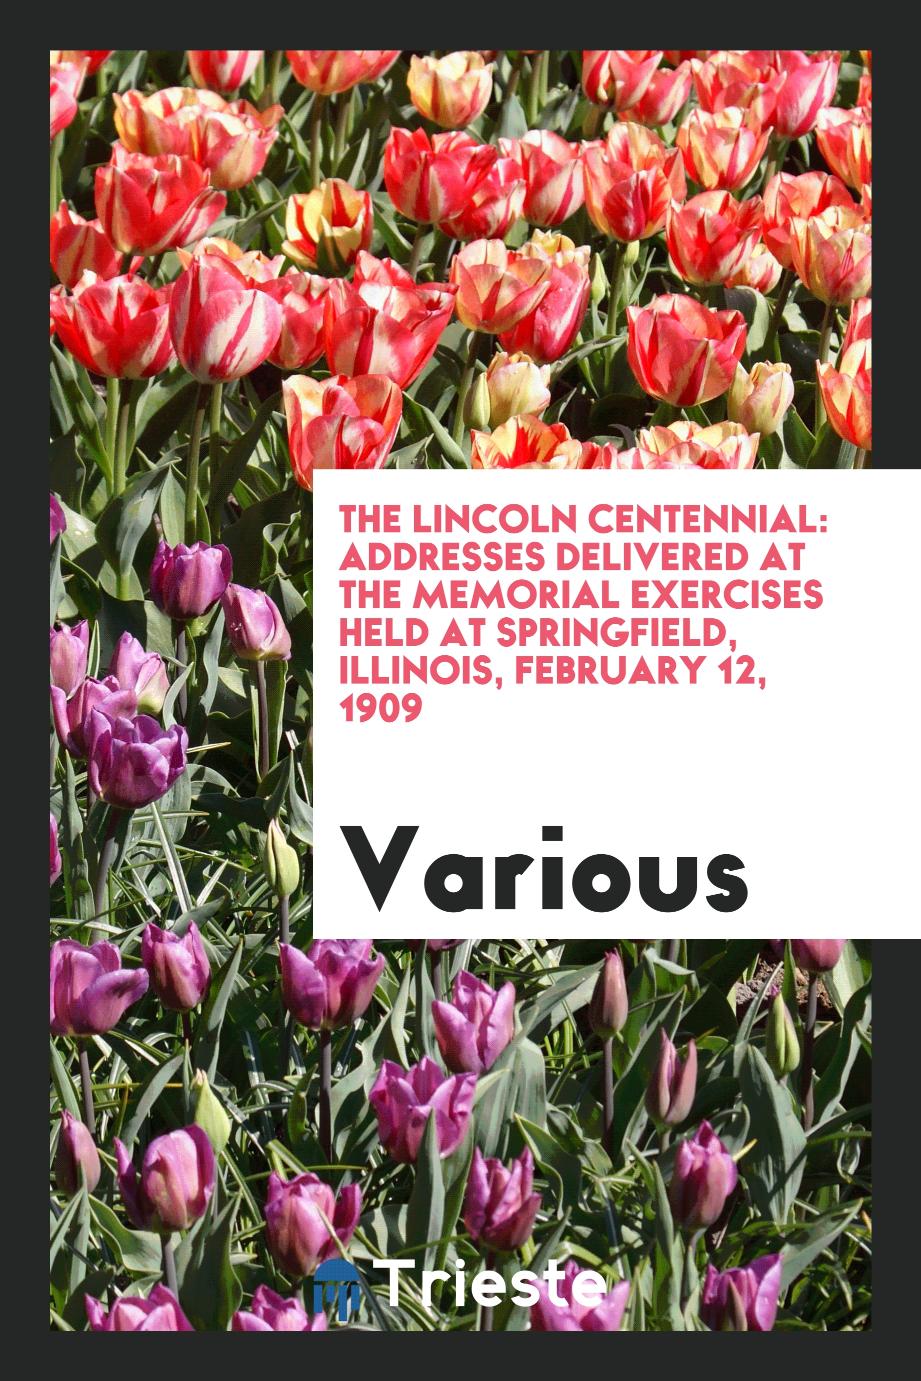 The Lincoln centennial: addresses delivered at the memorial exercises held at Springfield, Illinois, February 12, 1909